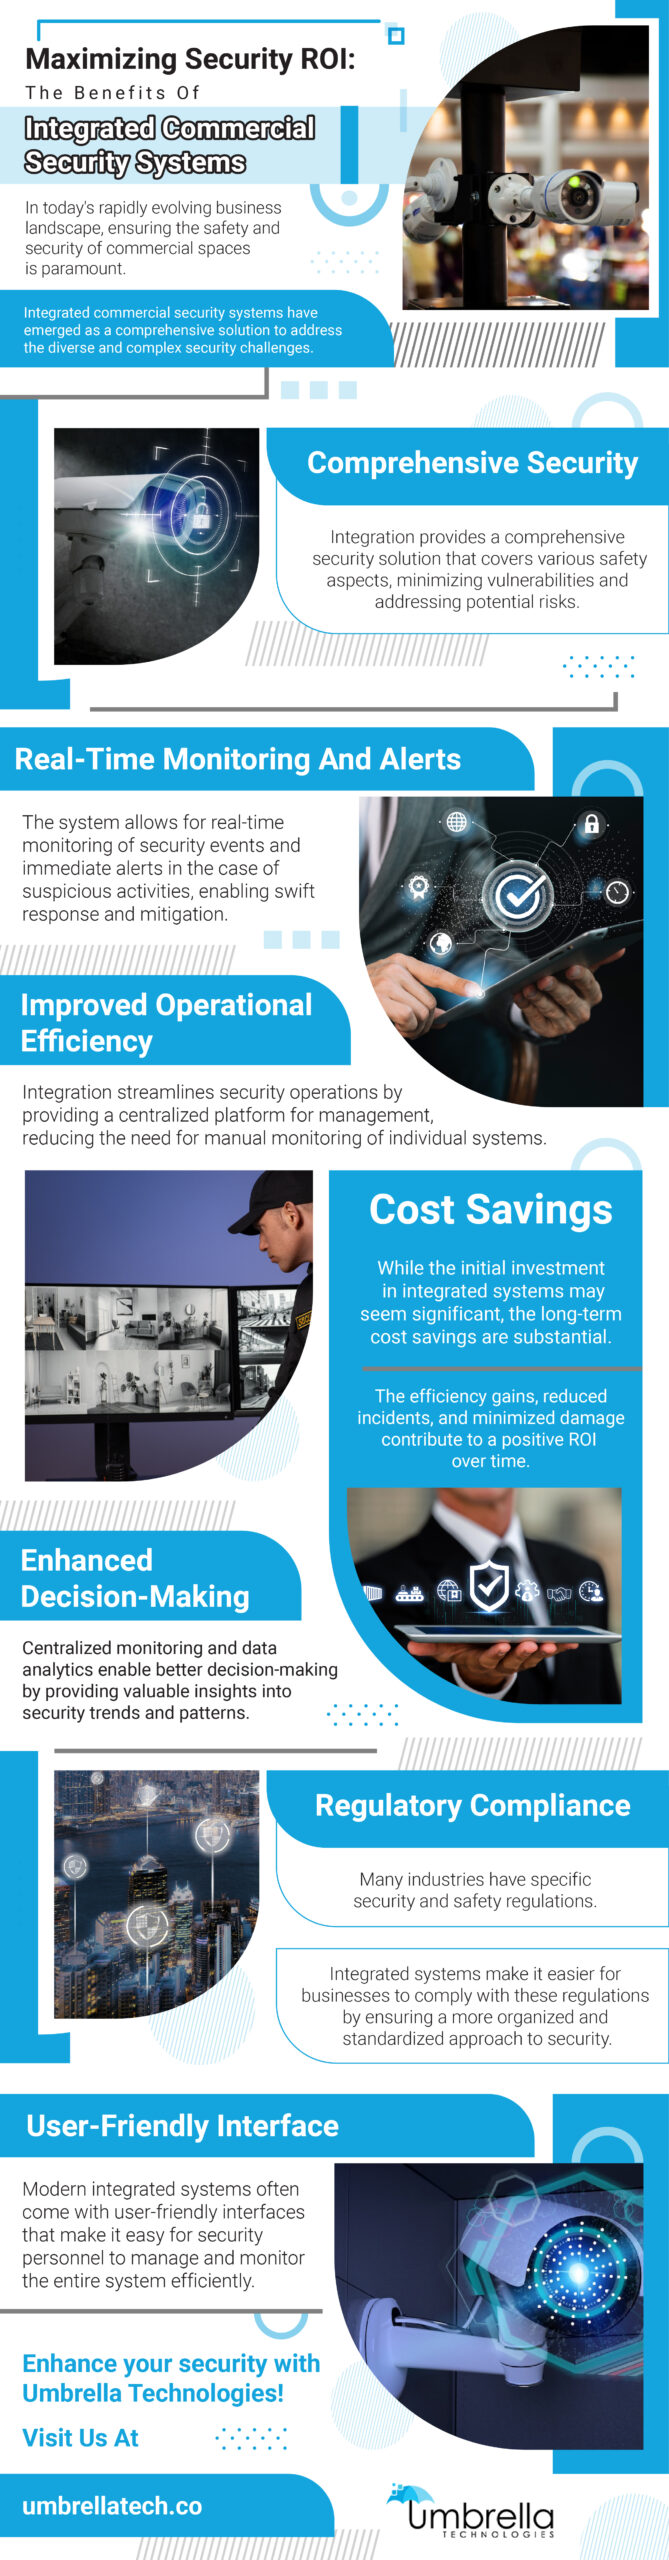 UmbrellaTech Info 01 2 scaled Maximizing Security ROI: The Benefits Of Integrated Commercial Security Systems.